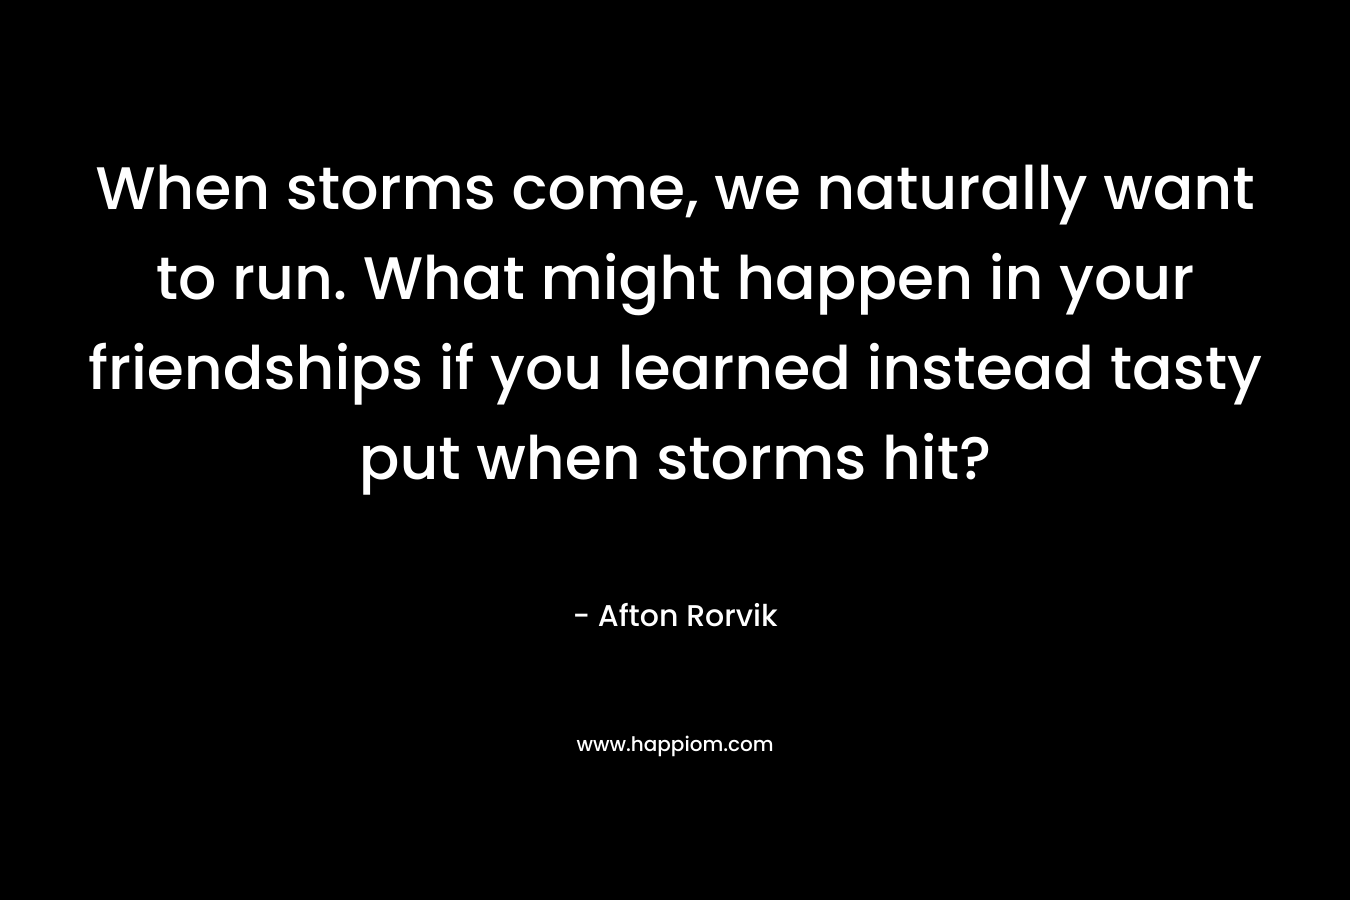 When storms come, we naturally want to run. What might happen in your friendships if you learned instead tasty put when storms hit?